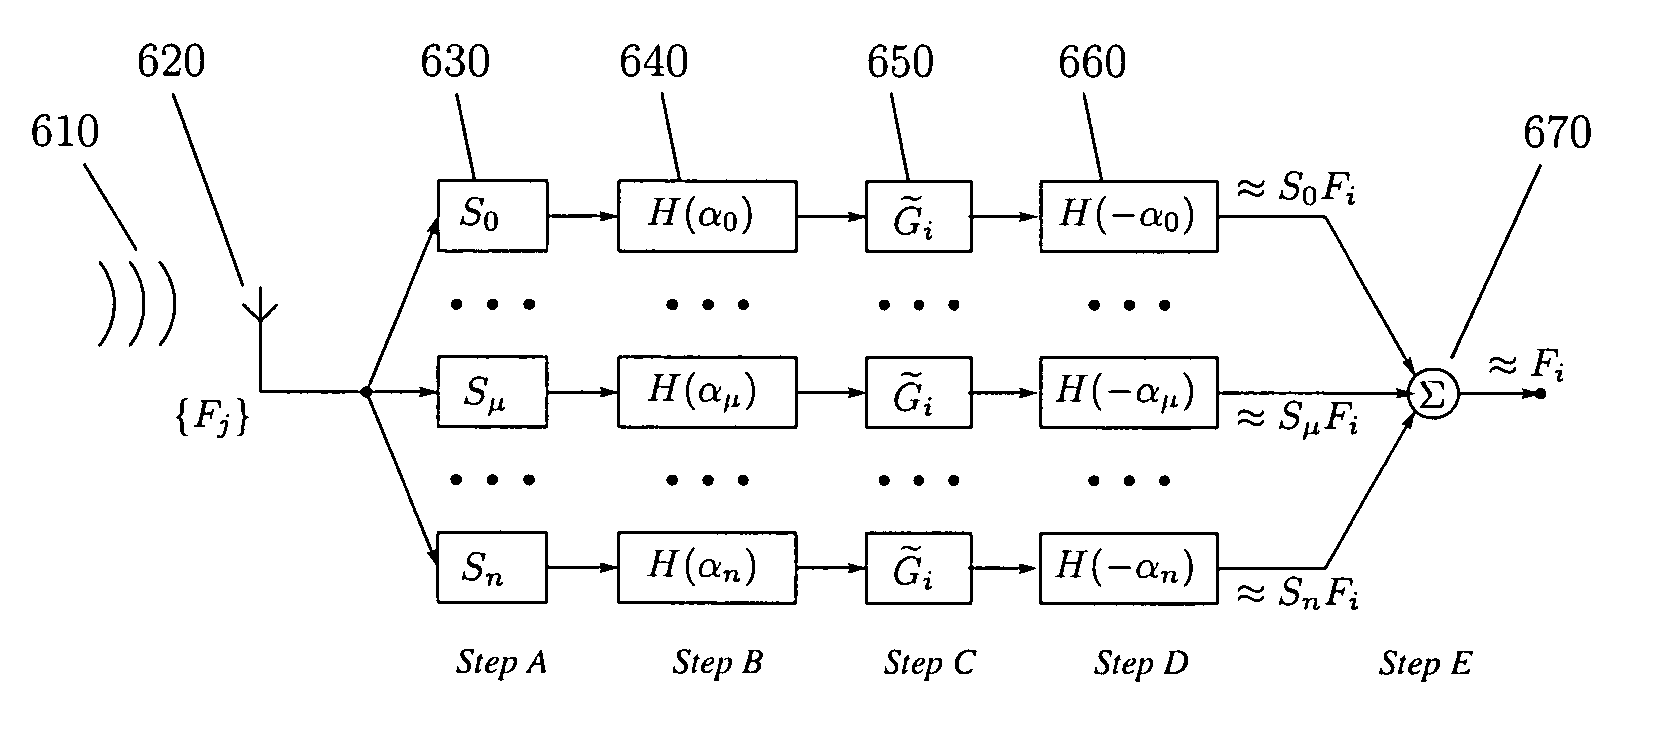 Distance division multiplexing